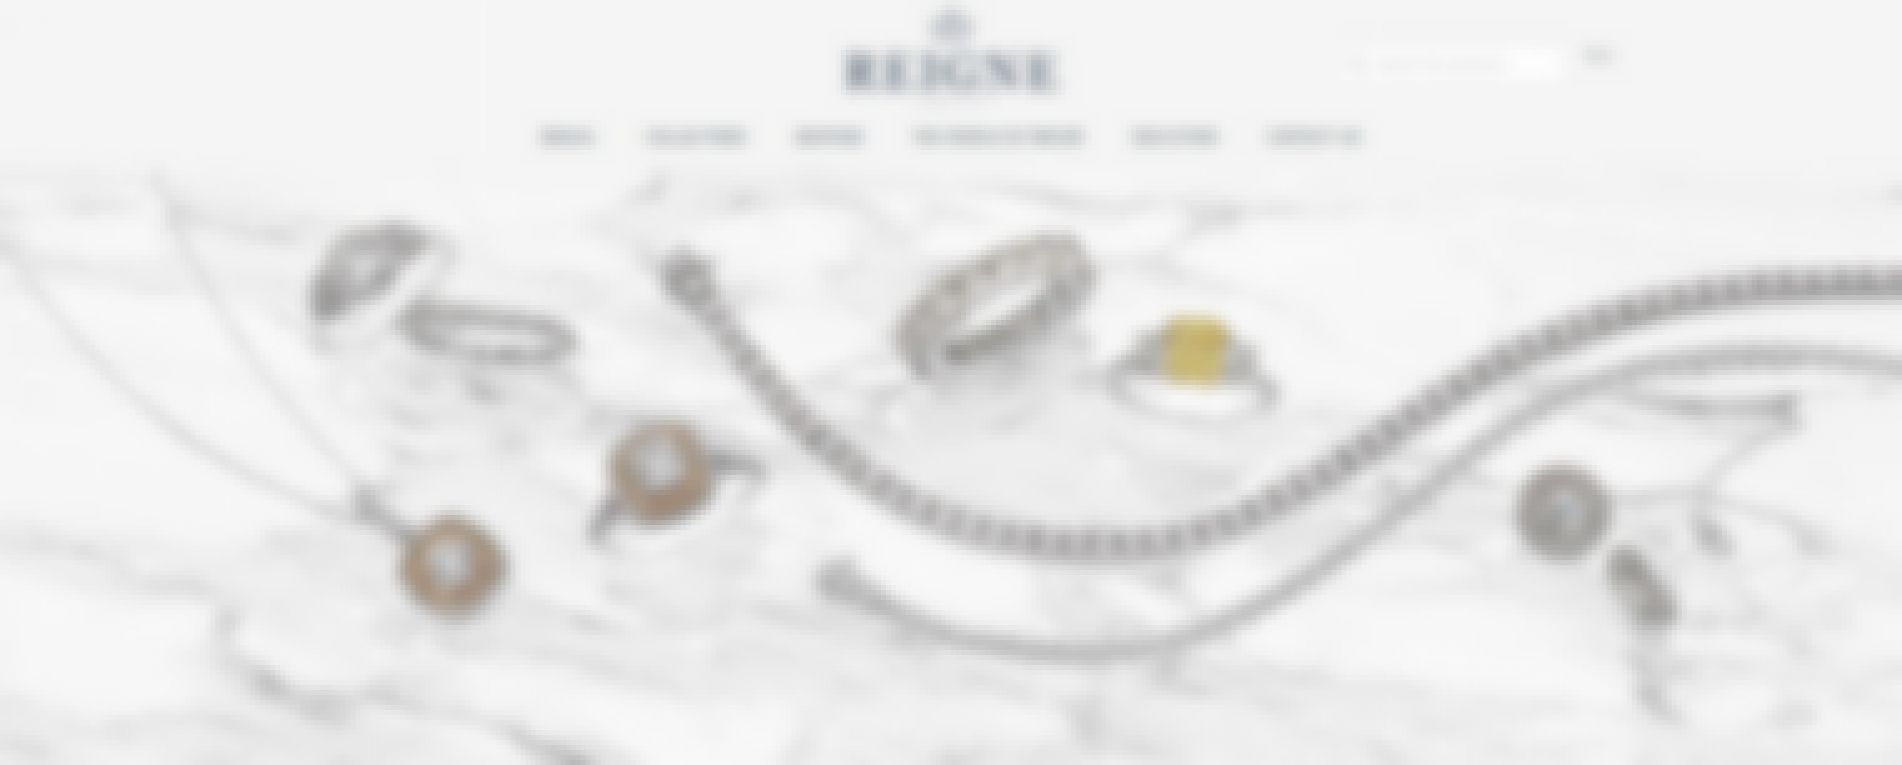 reigne jewellery engagement rings & wedding band shop melbourne